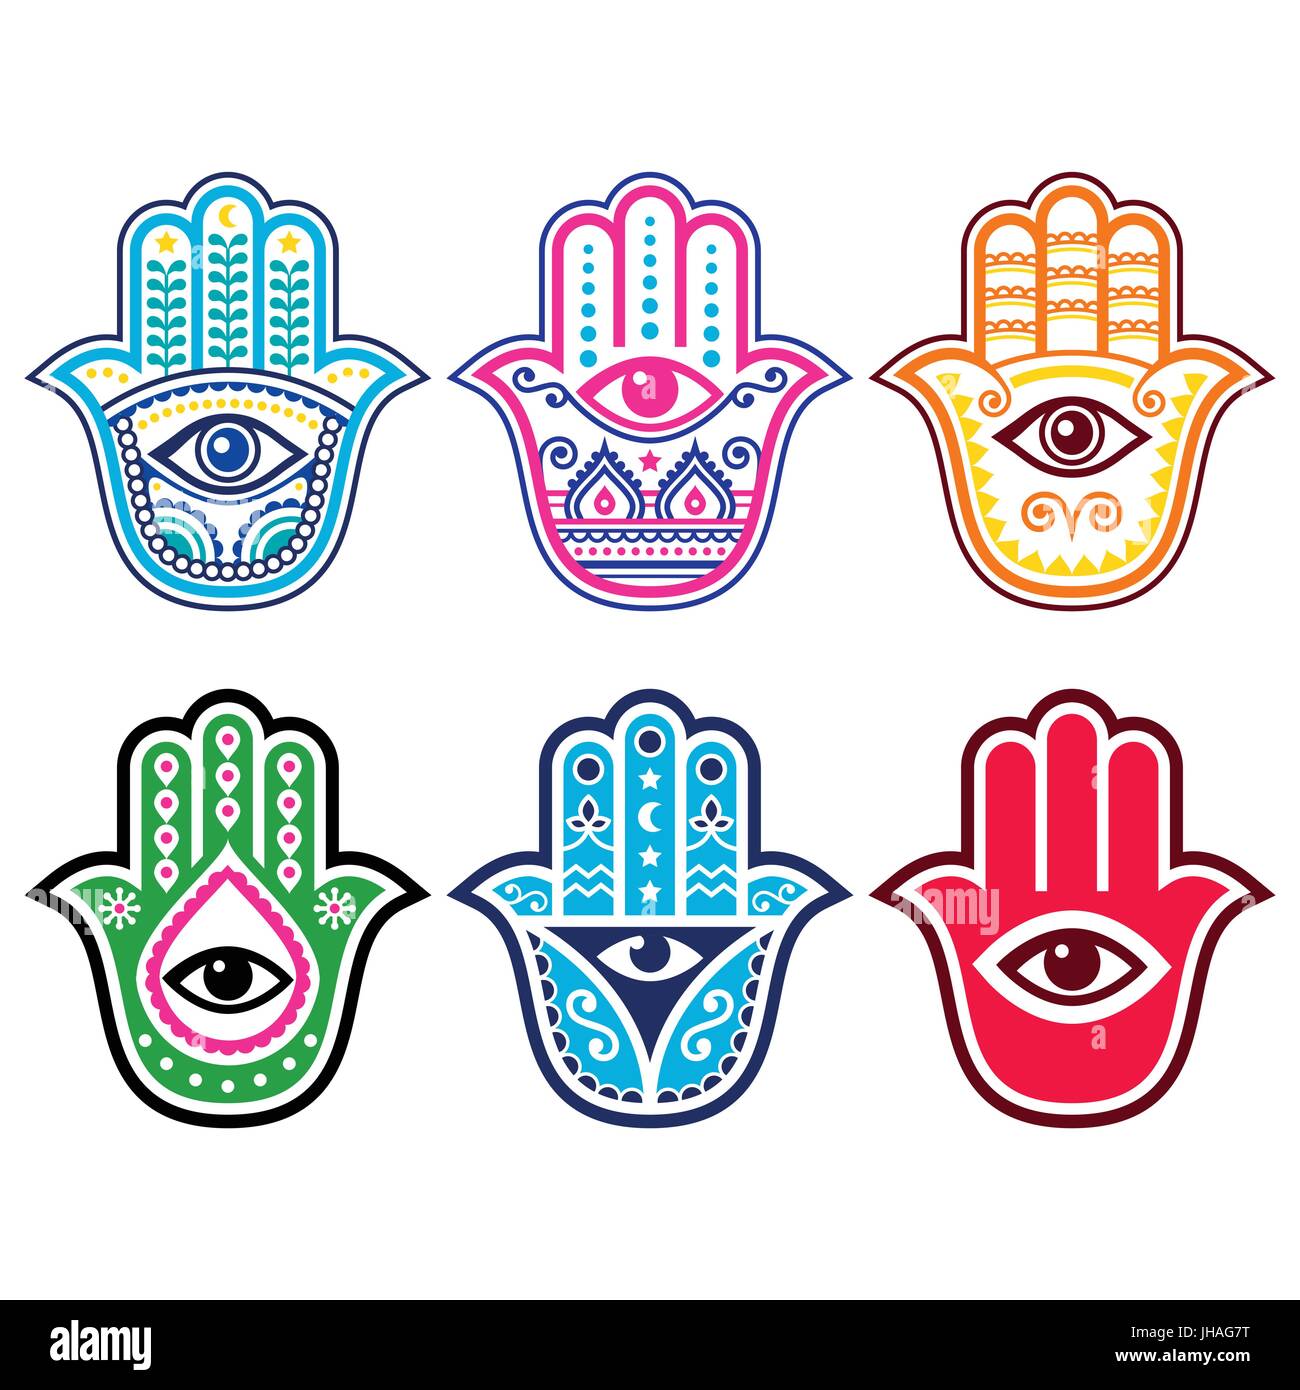 Hamsa hand Cut Out Stock Images & Pictures - Alamy